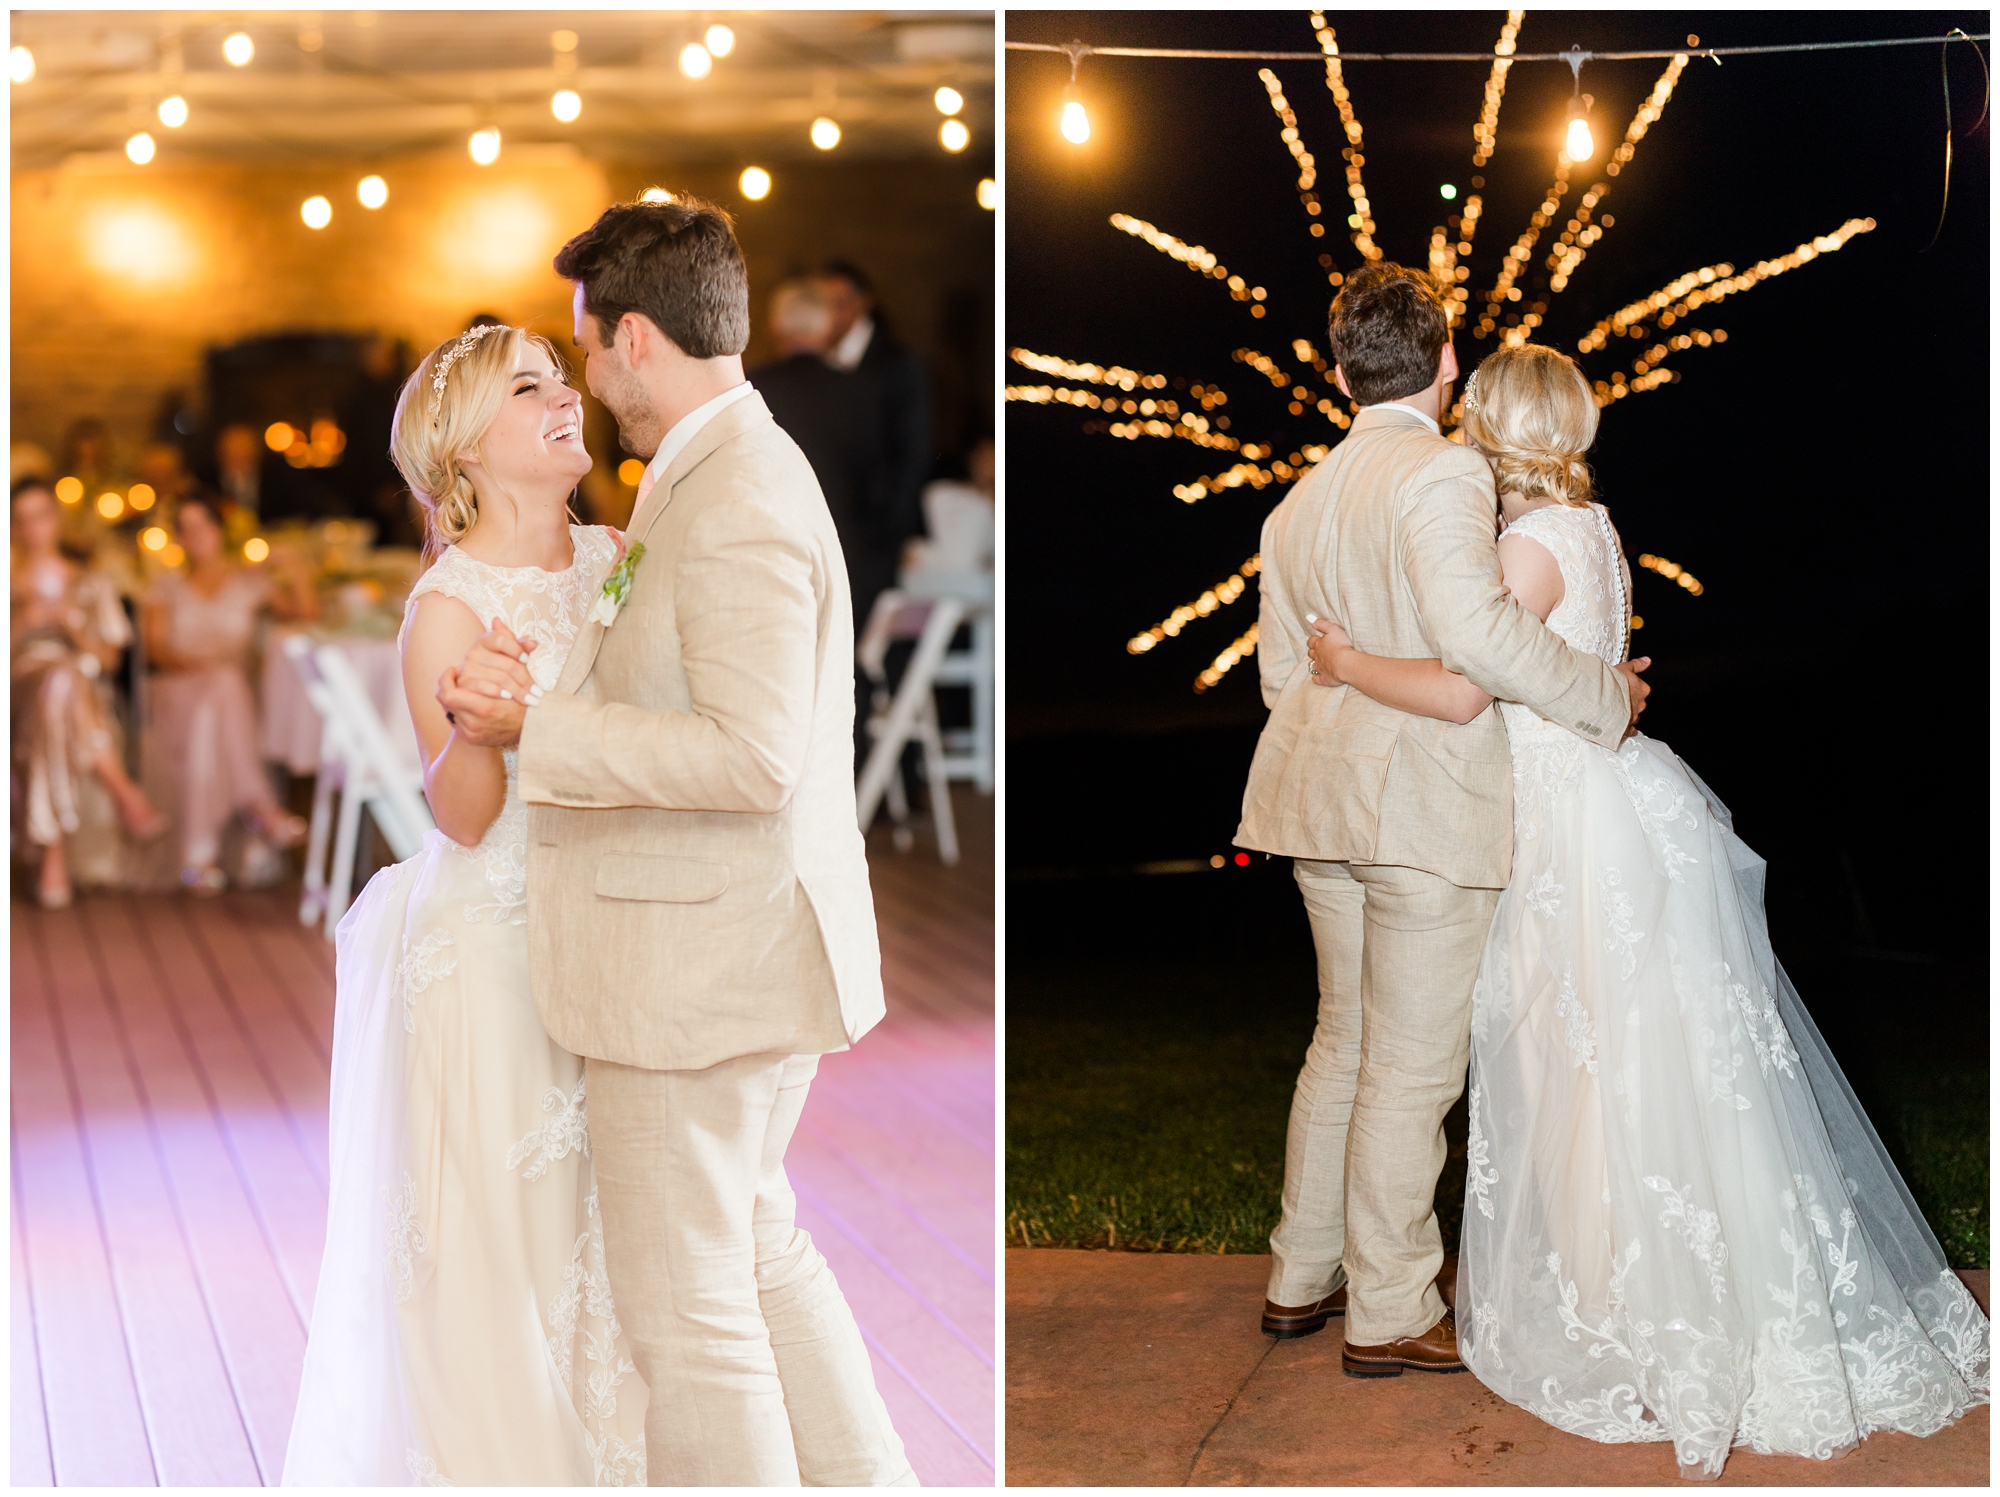 The bride and groom enjoy their first dance at the wedding reception at deception vineyard. In the second picture the bride and groom enjoy their private fireworks show to cap off their reception. 